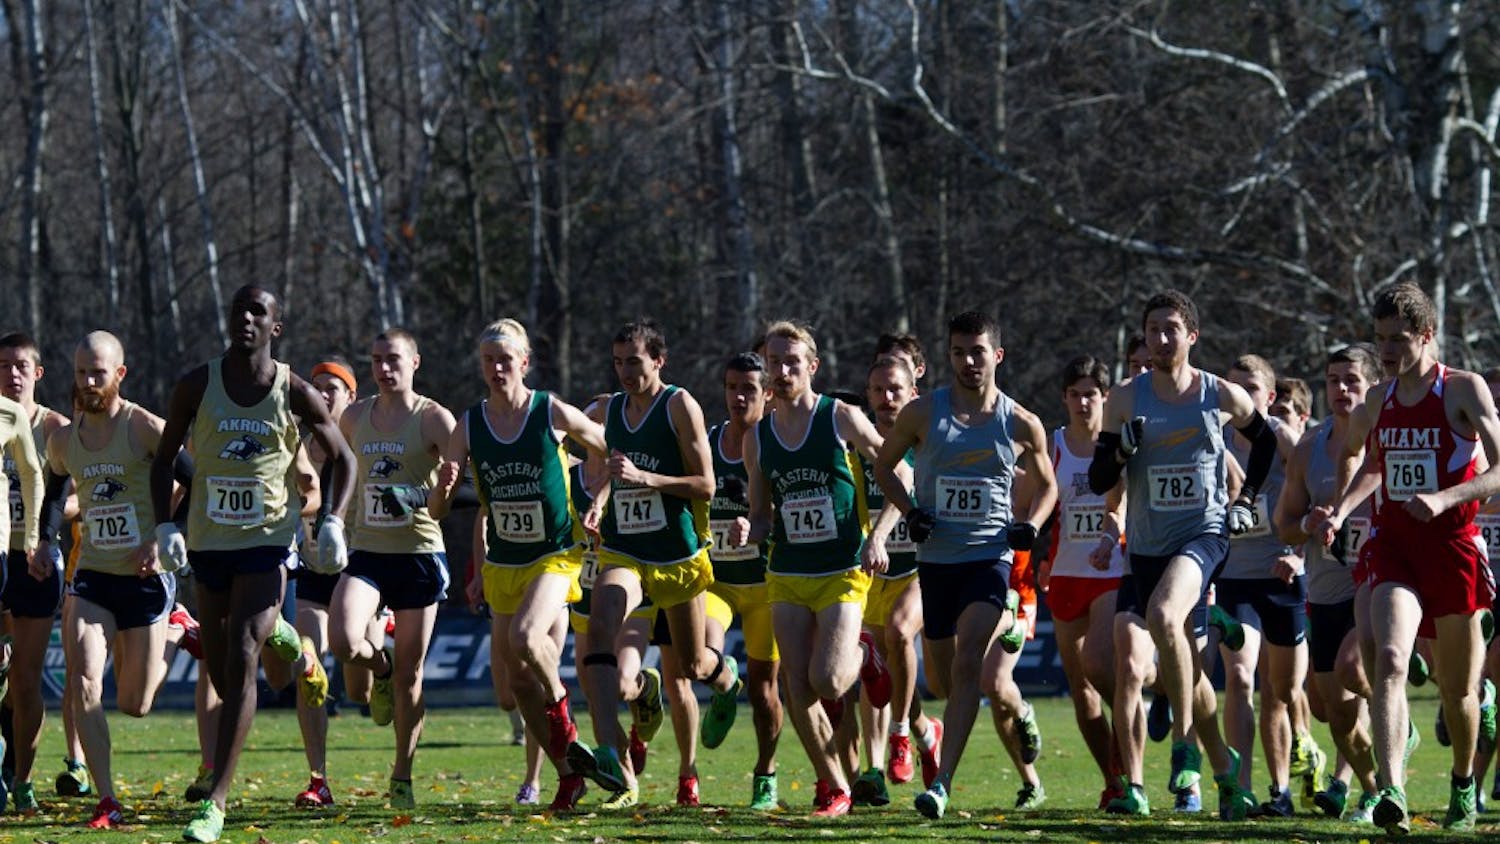 The men’s cross country team starts the race during the MAC Championship meet at Central 
Michigan University in Mount Pleasant on Saturday, November 1st, 2014.